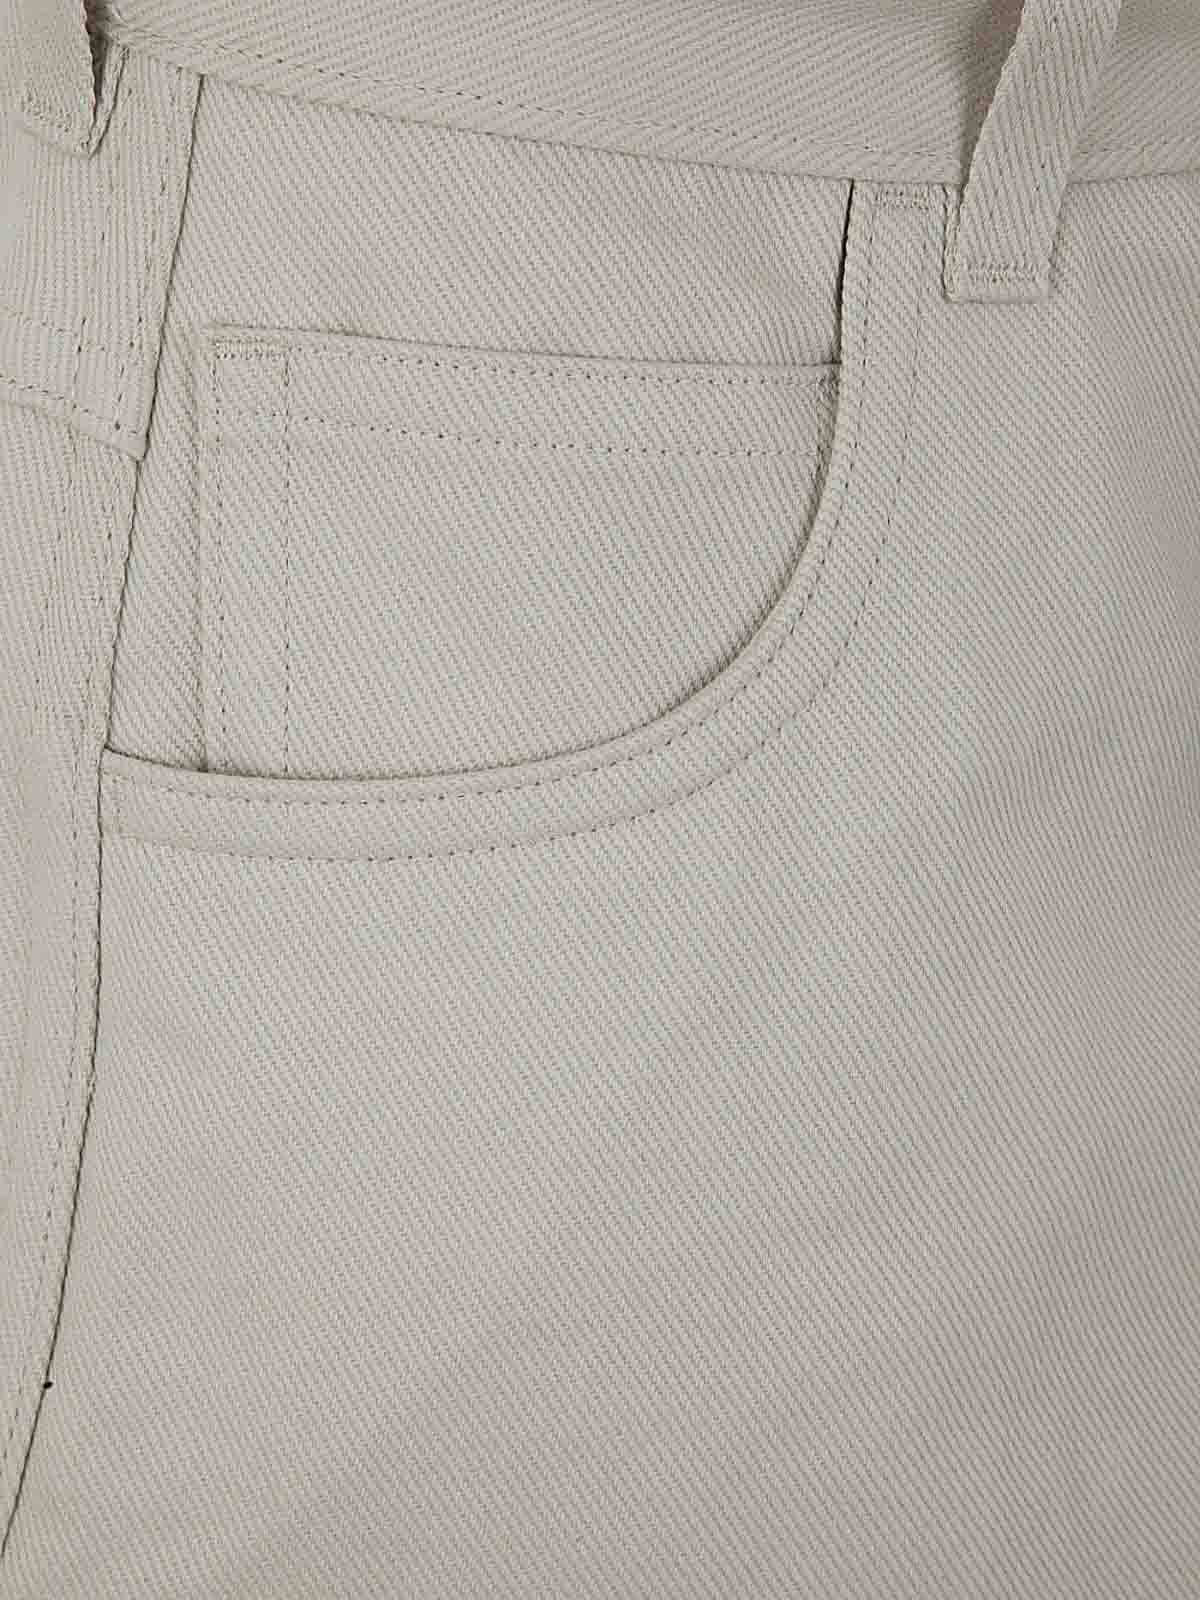 Shop Sofie D'hoore 5-pockets Jeans In White